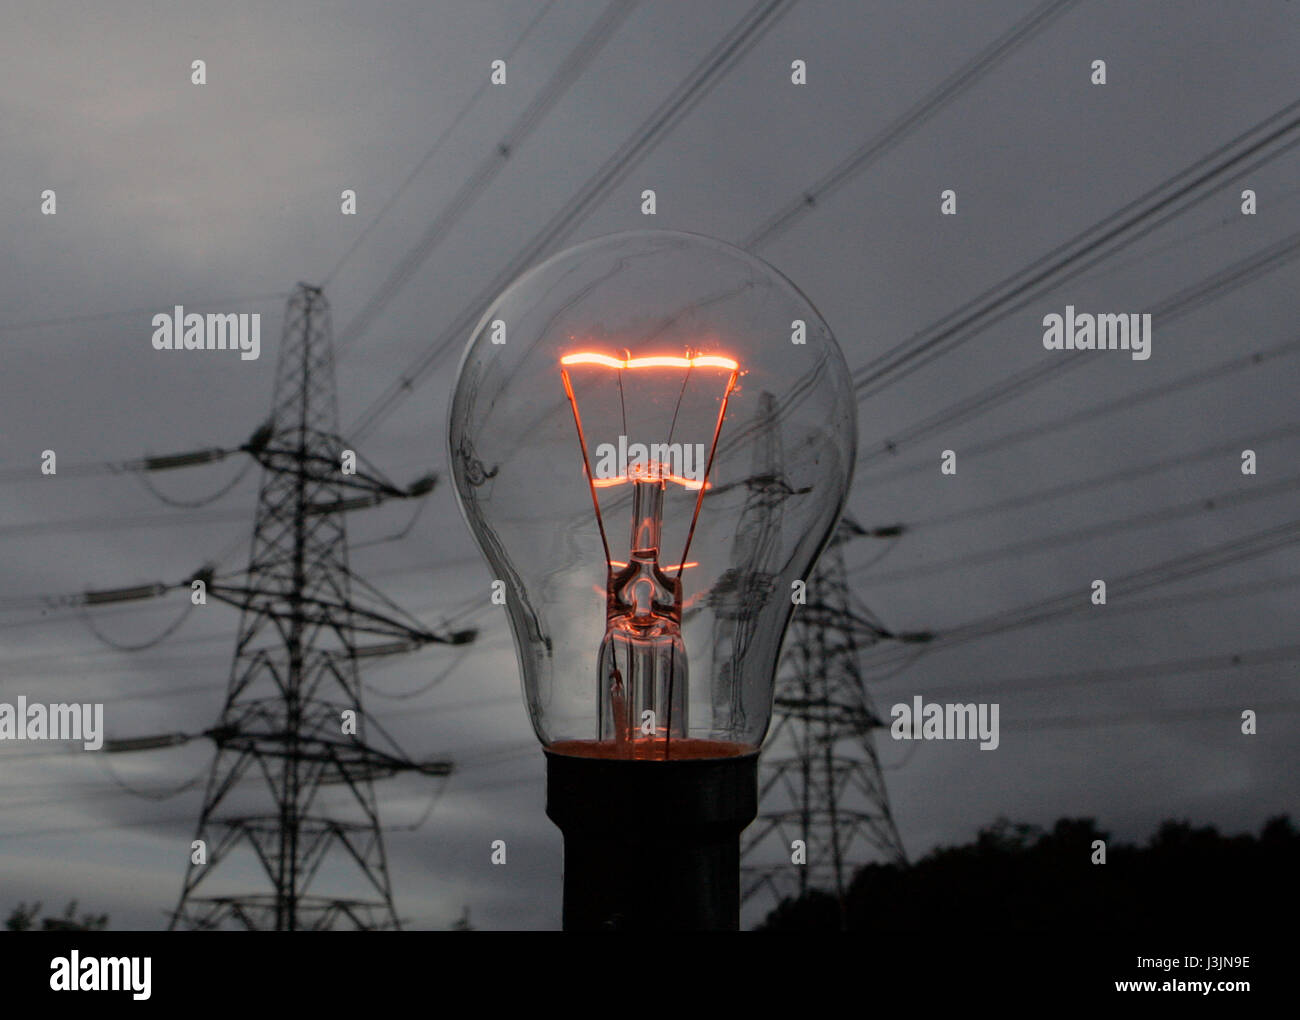 High voltage electricity grid  power supply lines at dusk with an illuminated  filament in an incandescent light bulb in Central Scotland Stock Photo